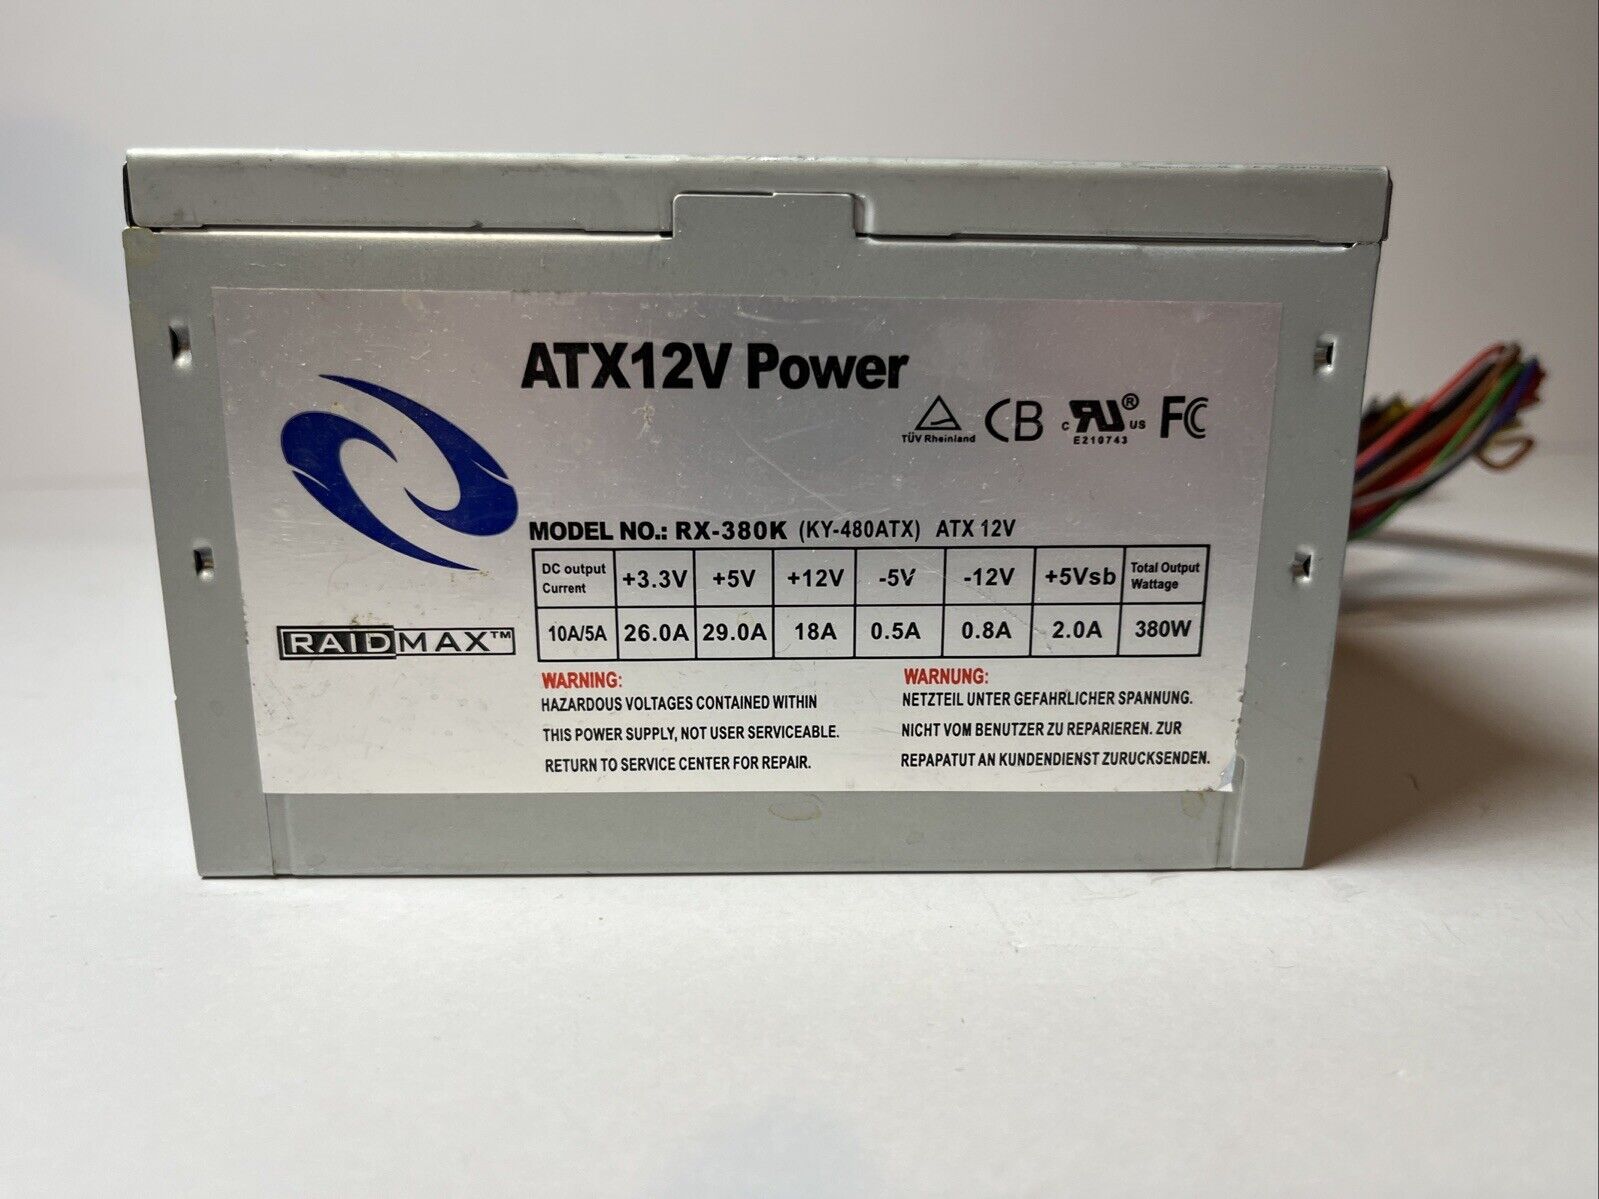 RaidMax Active PFC Power Supply 380w RX-380K Tested And Working